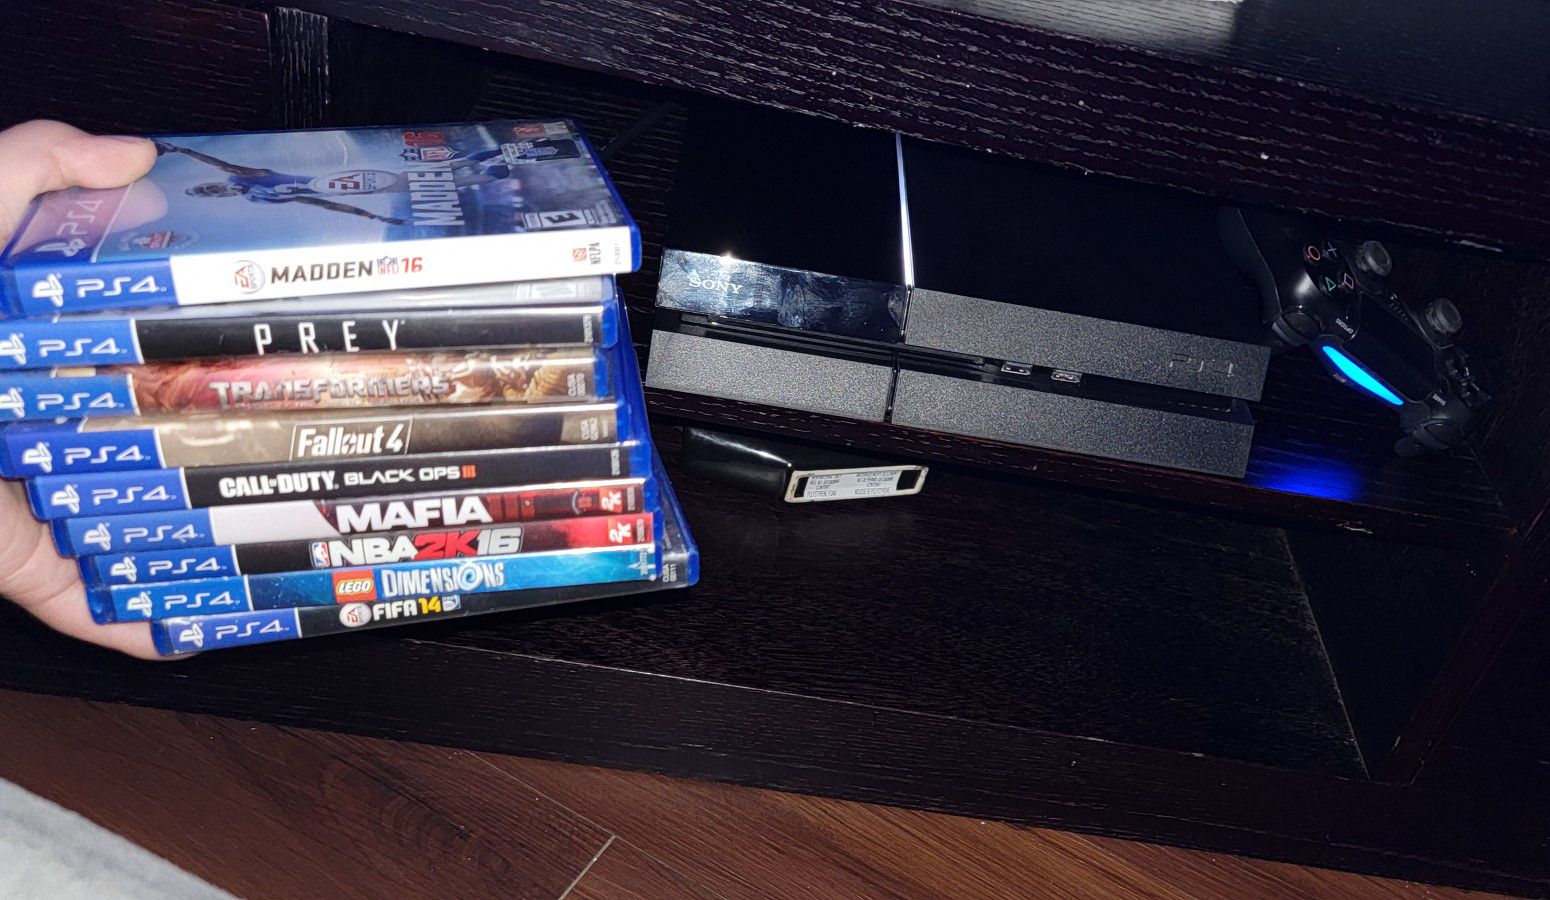 PS4 & GAMES, CONTROLLER 